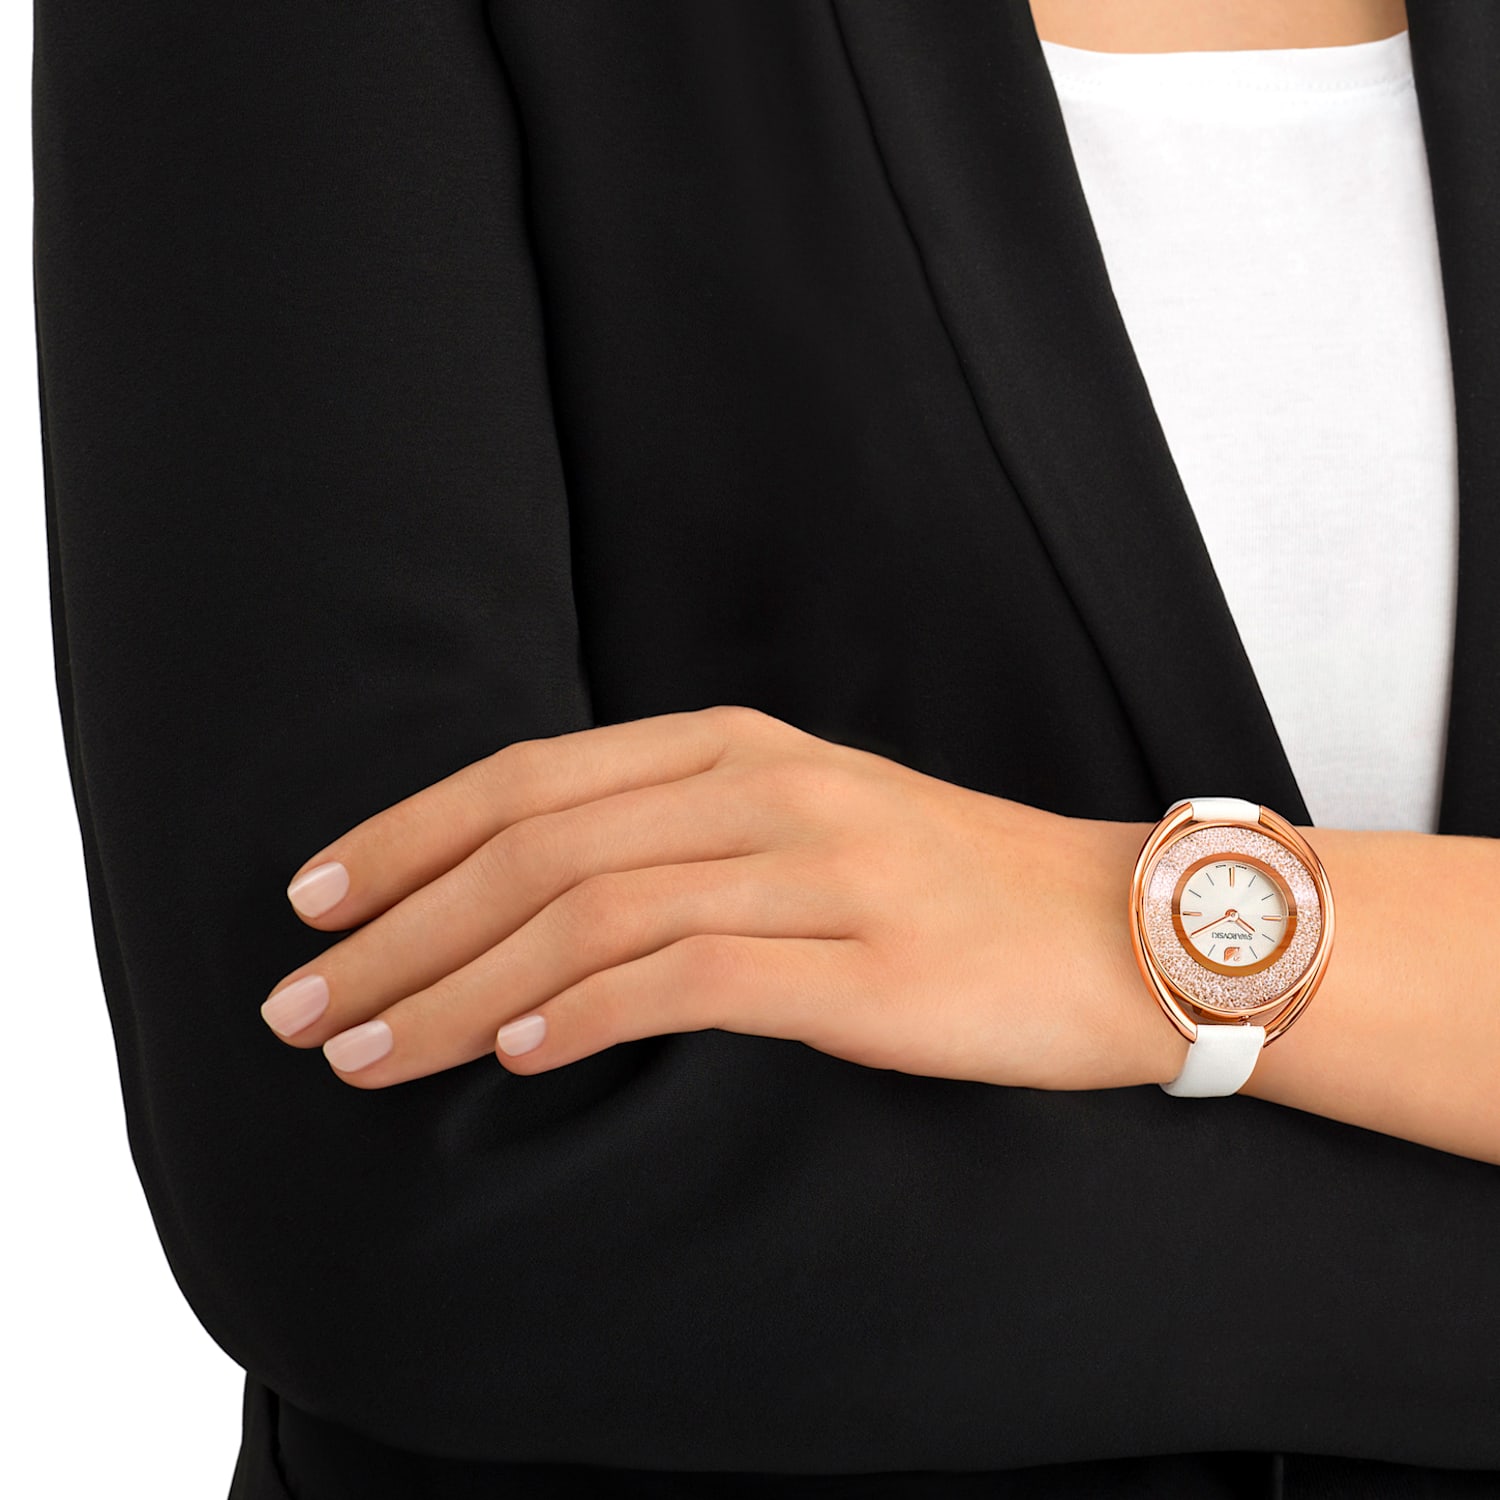 Crystalline Oval Watch, Leather strap, White, Rose-gold tone PVD